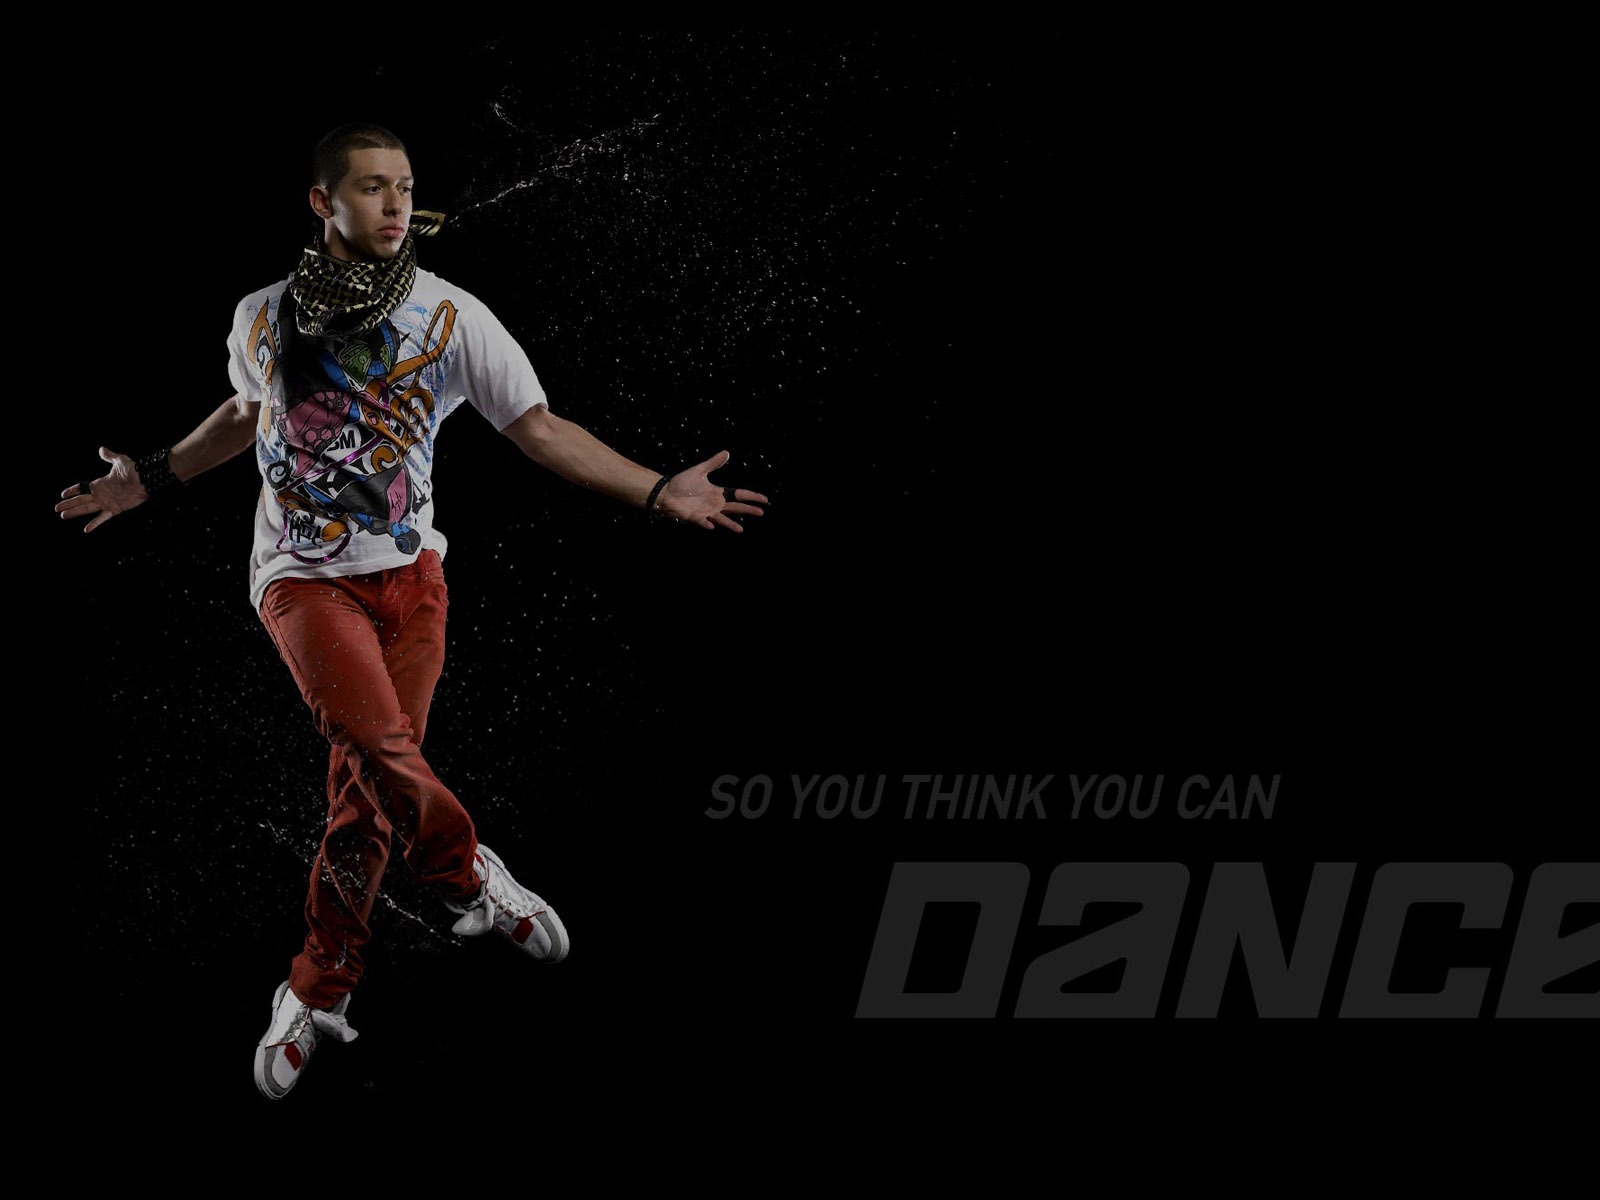 So You Think You Can Dance wallpaper (1) #16 - 1600x1200